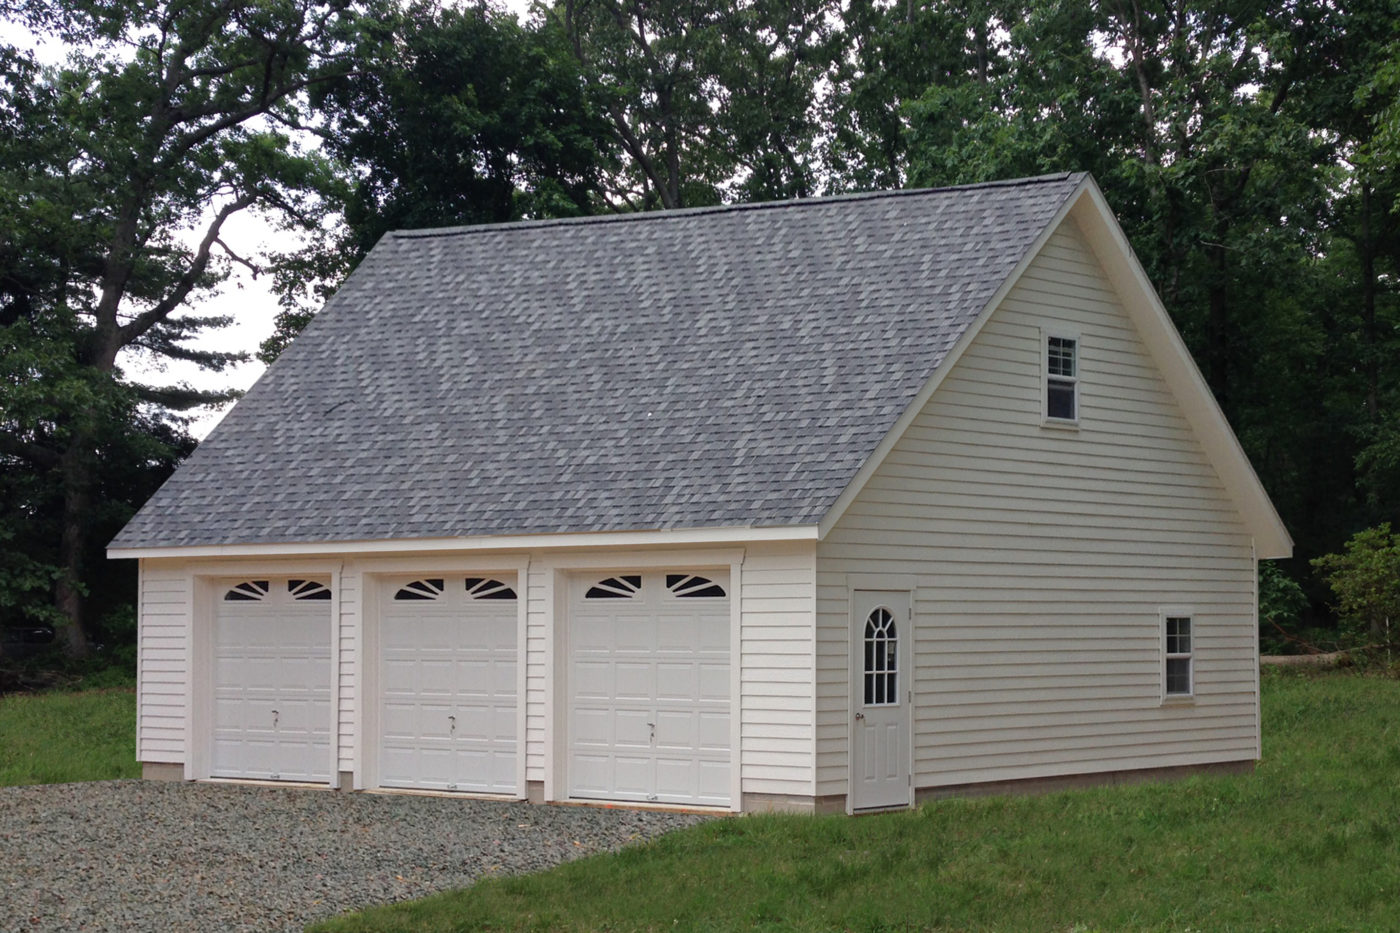 How Much Does A Detached Garage Cost, Cost Per Sq Foot To Build A Detached Garage